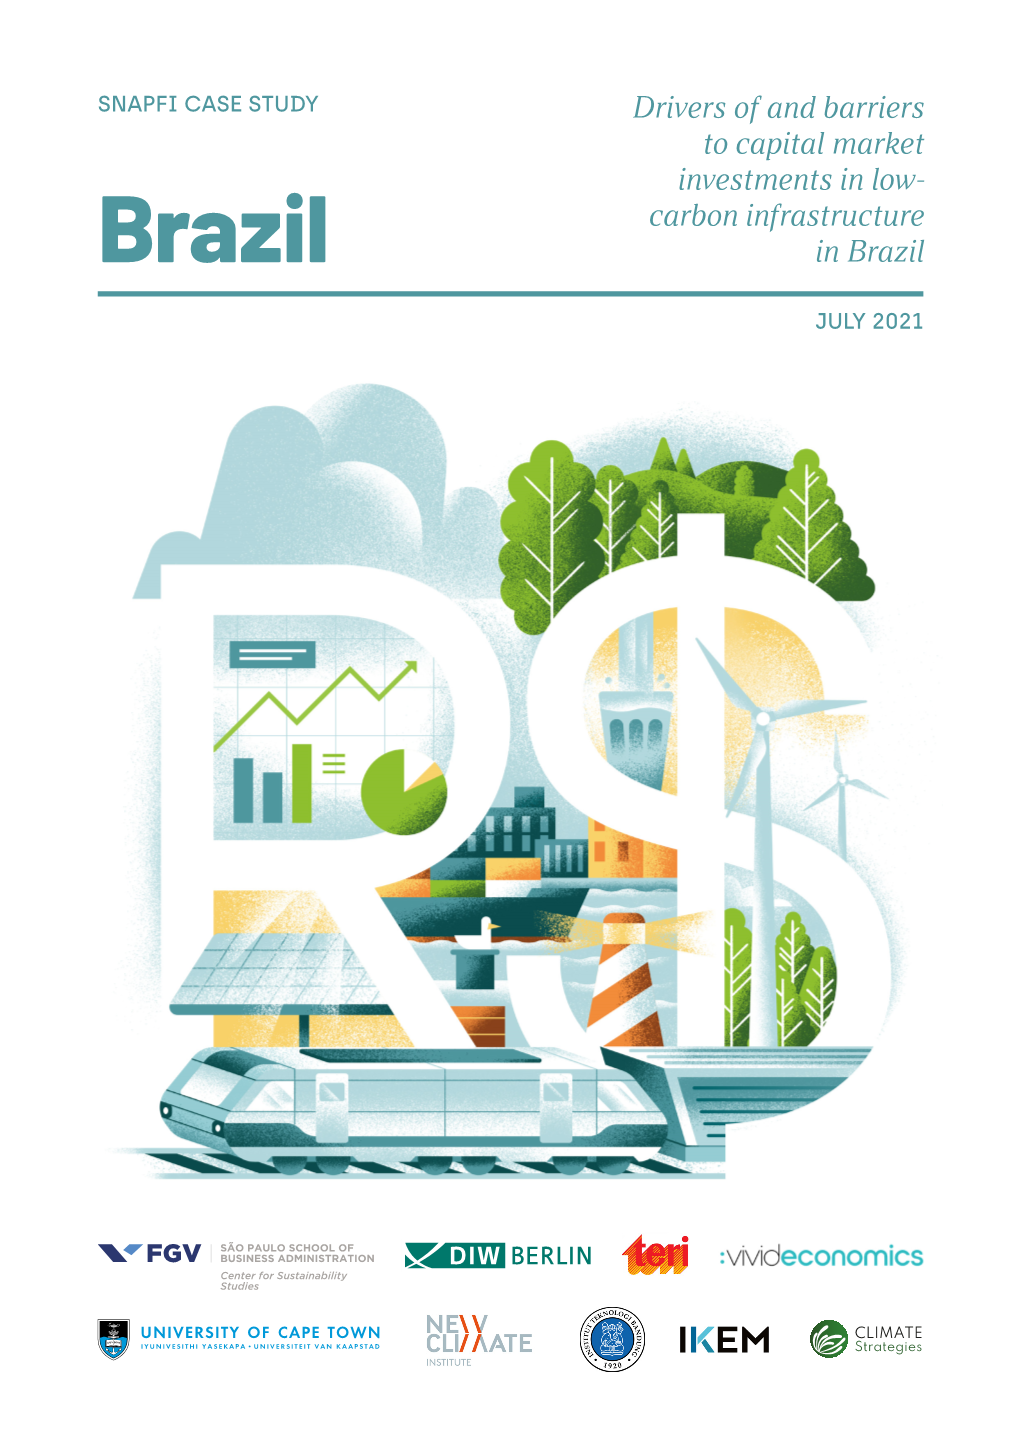 Drivers of and Barriers to Capital Market Investments in Low-Carbon Infrastructure in Brazil